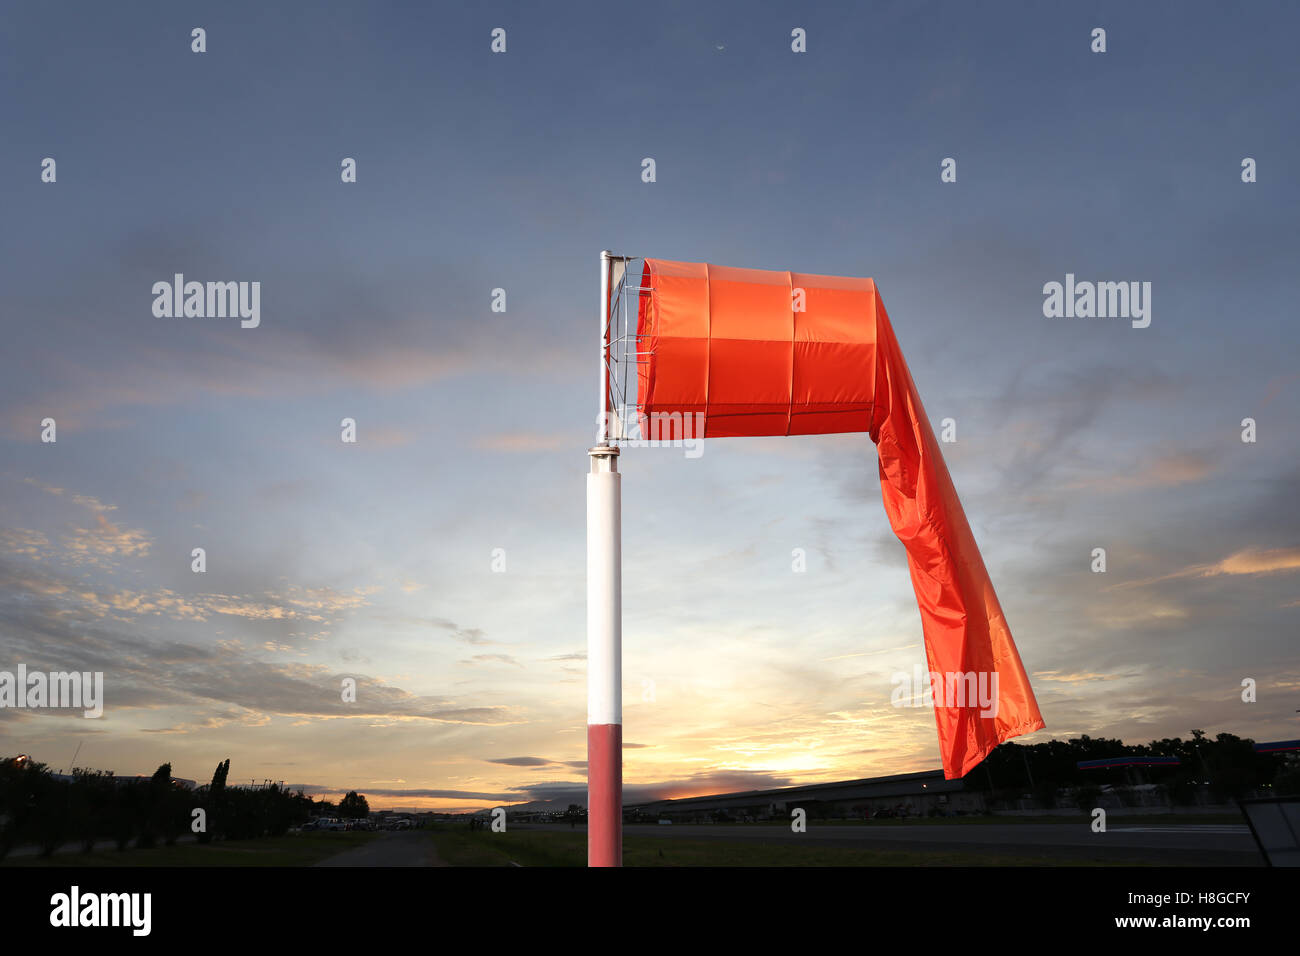 Wind sock of equipment check the wind blow direction in sunrise background. Stock Photo